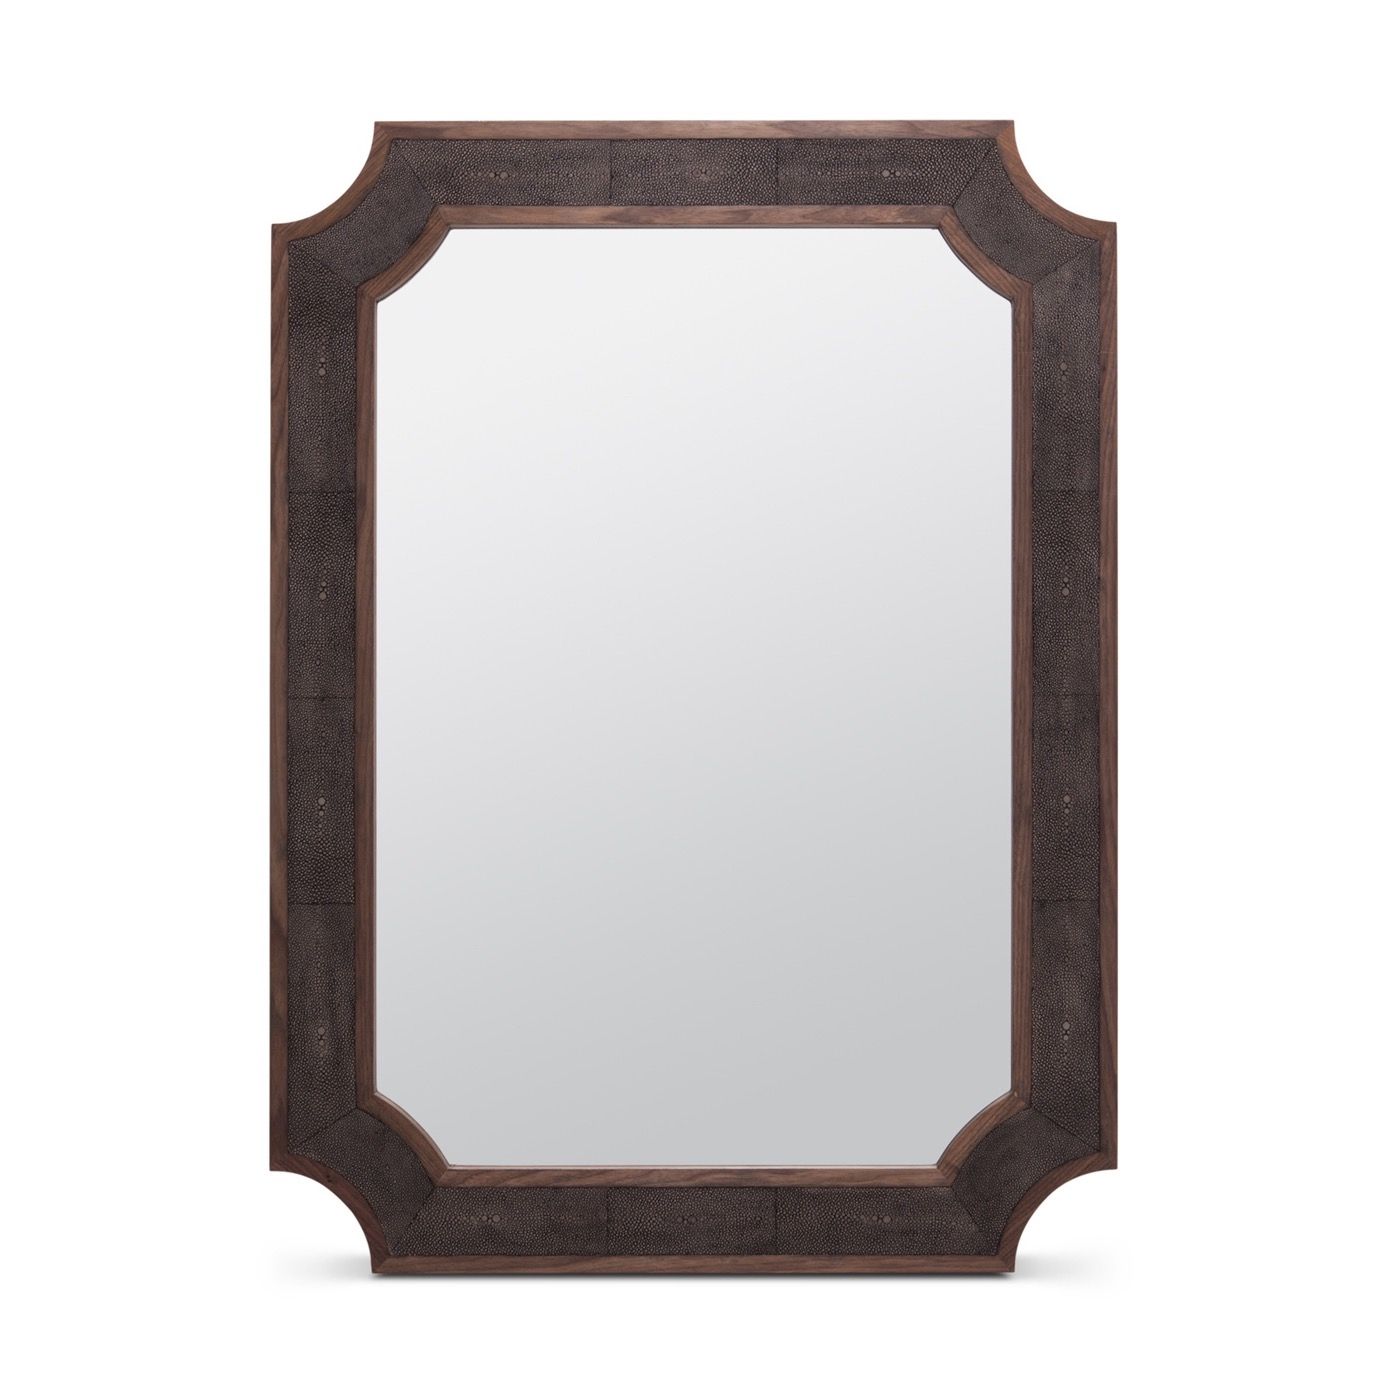 Patterson Wall Mirror | Brown | Plantation Design Throughout Chestnut Brown Wall Mirrors (View 2 of 15)